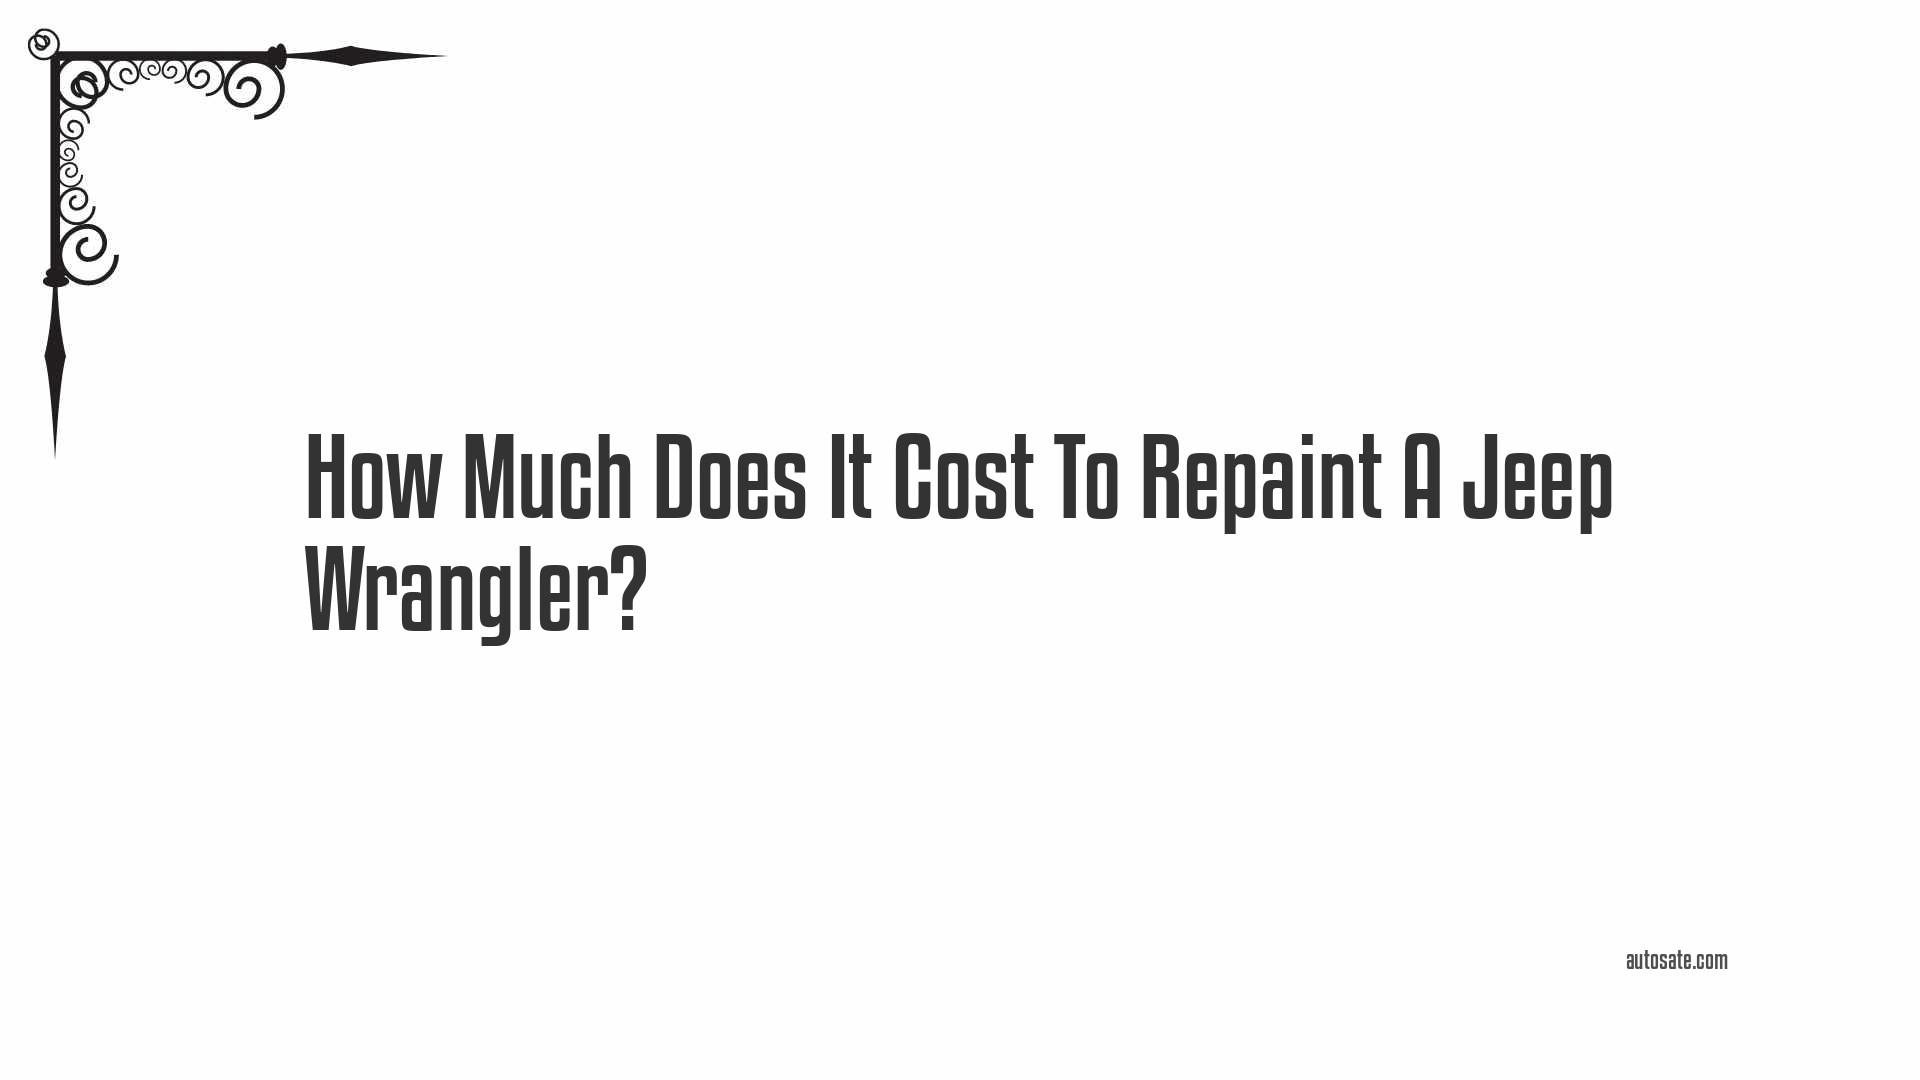 How Much Does It Cost To Repaint A Jeep Wrangler?